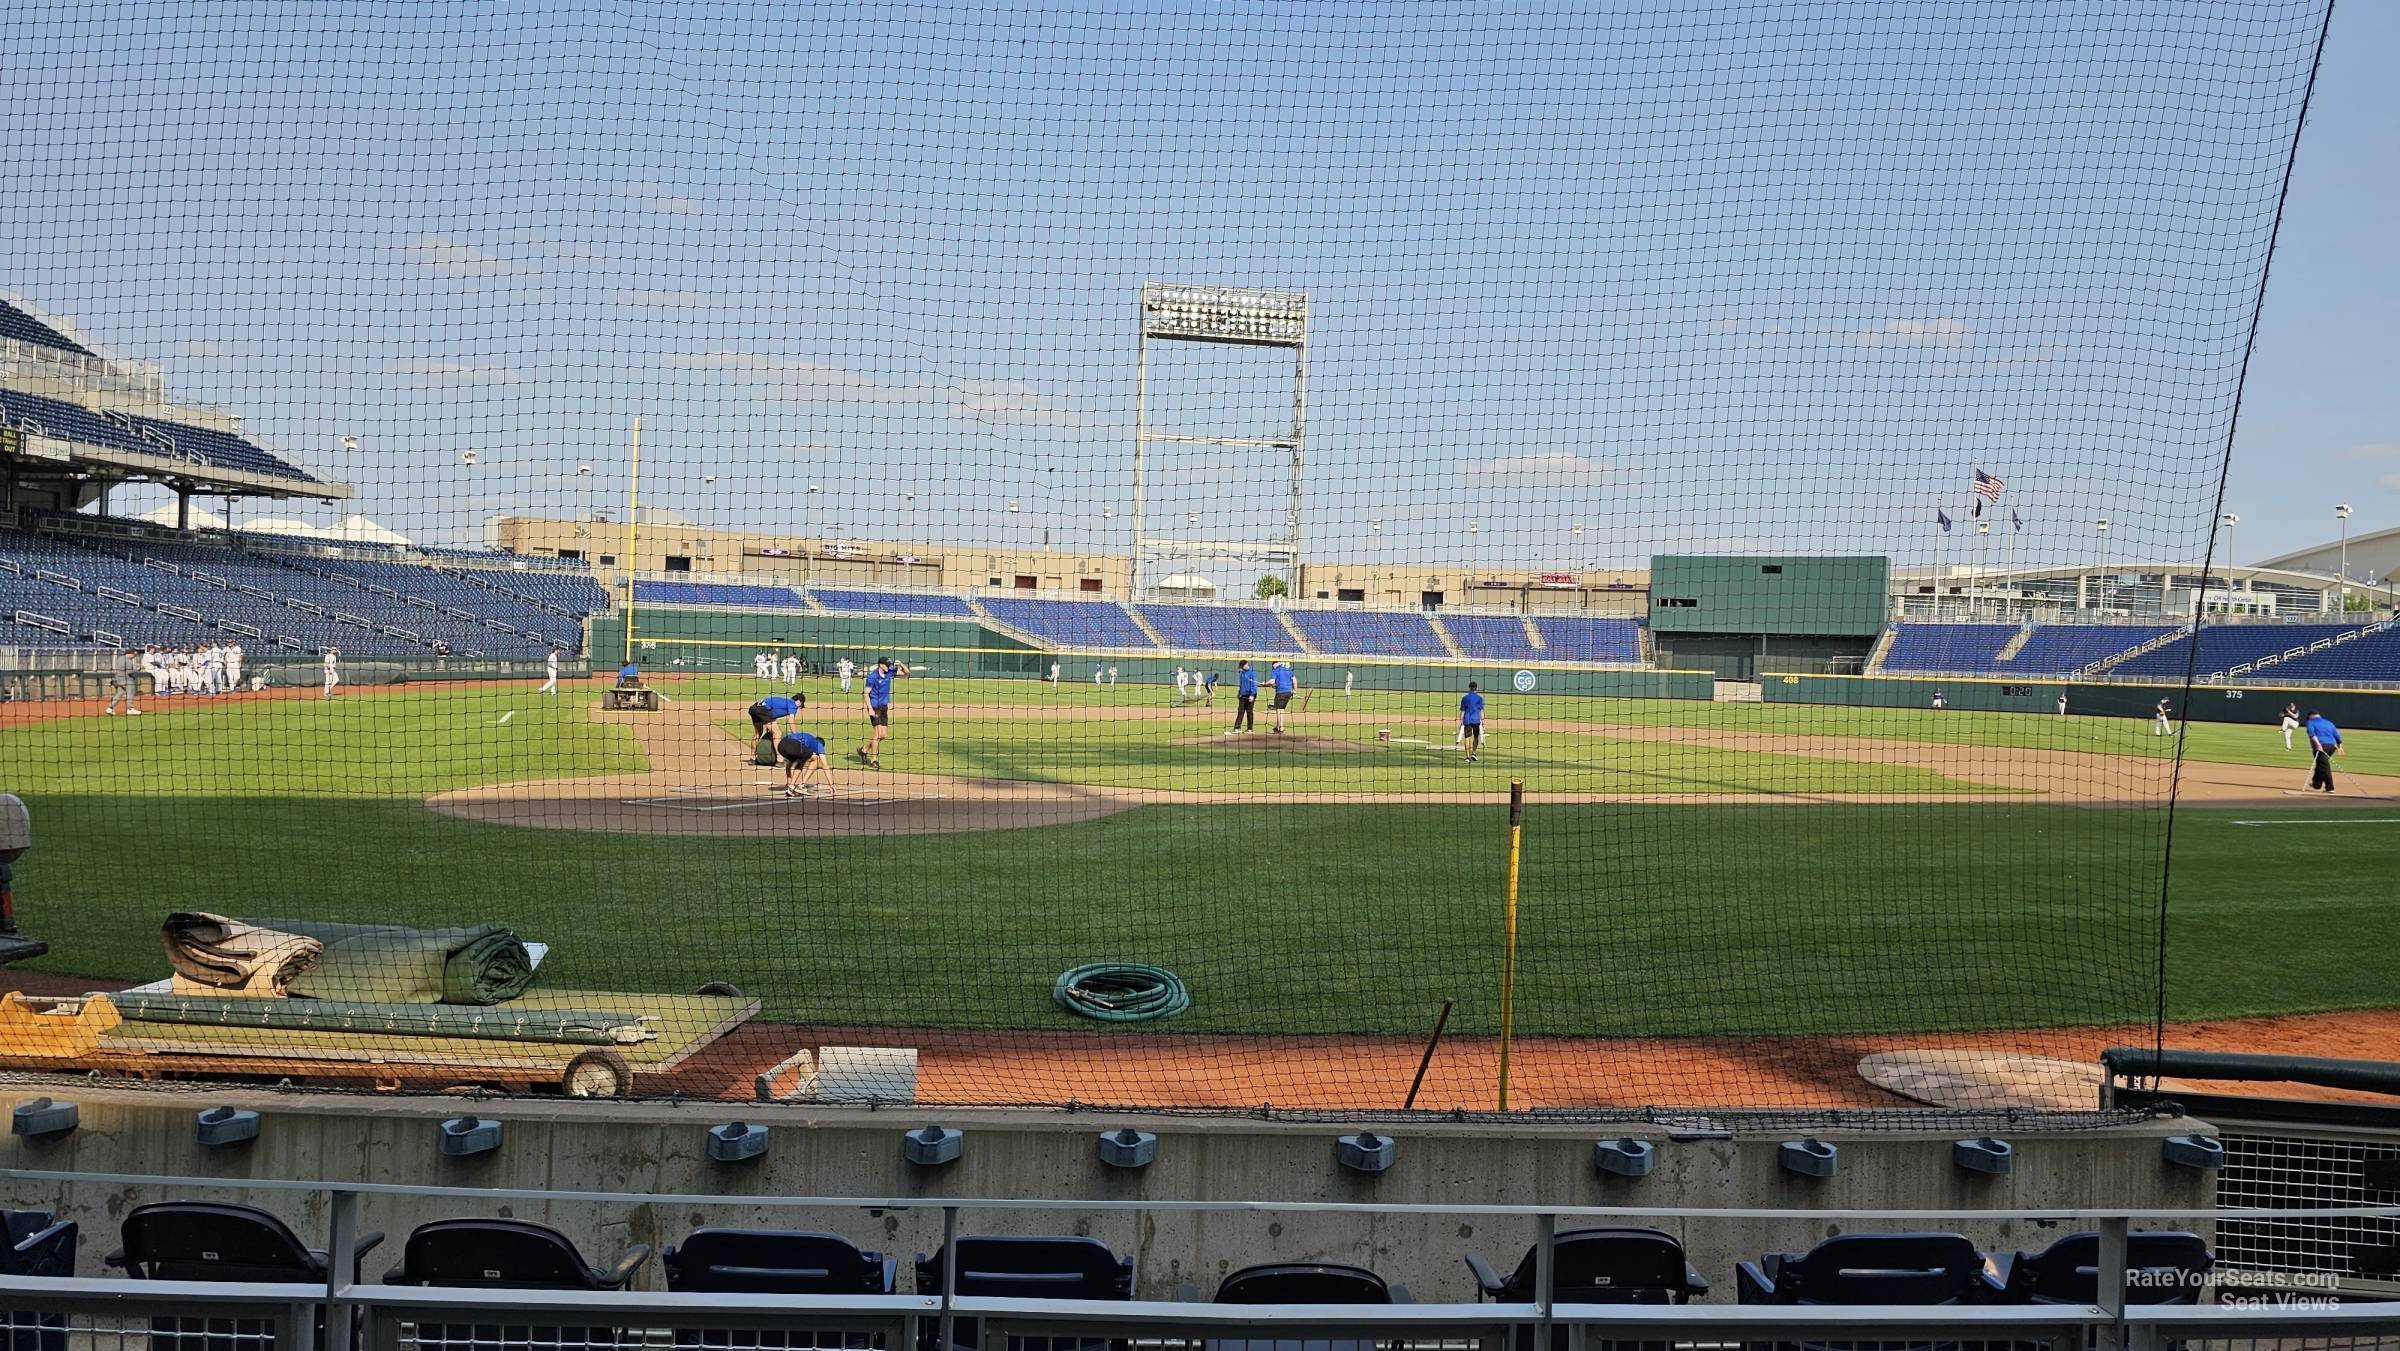 section 110, row 6 seat view  - charles schwab field